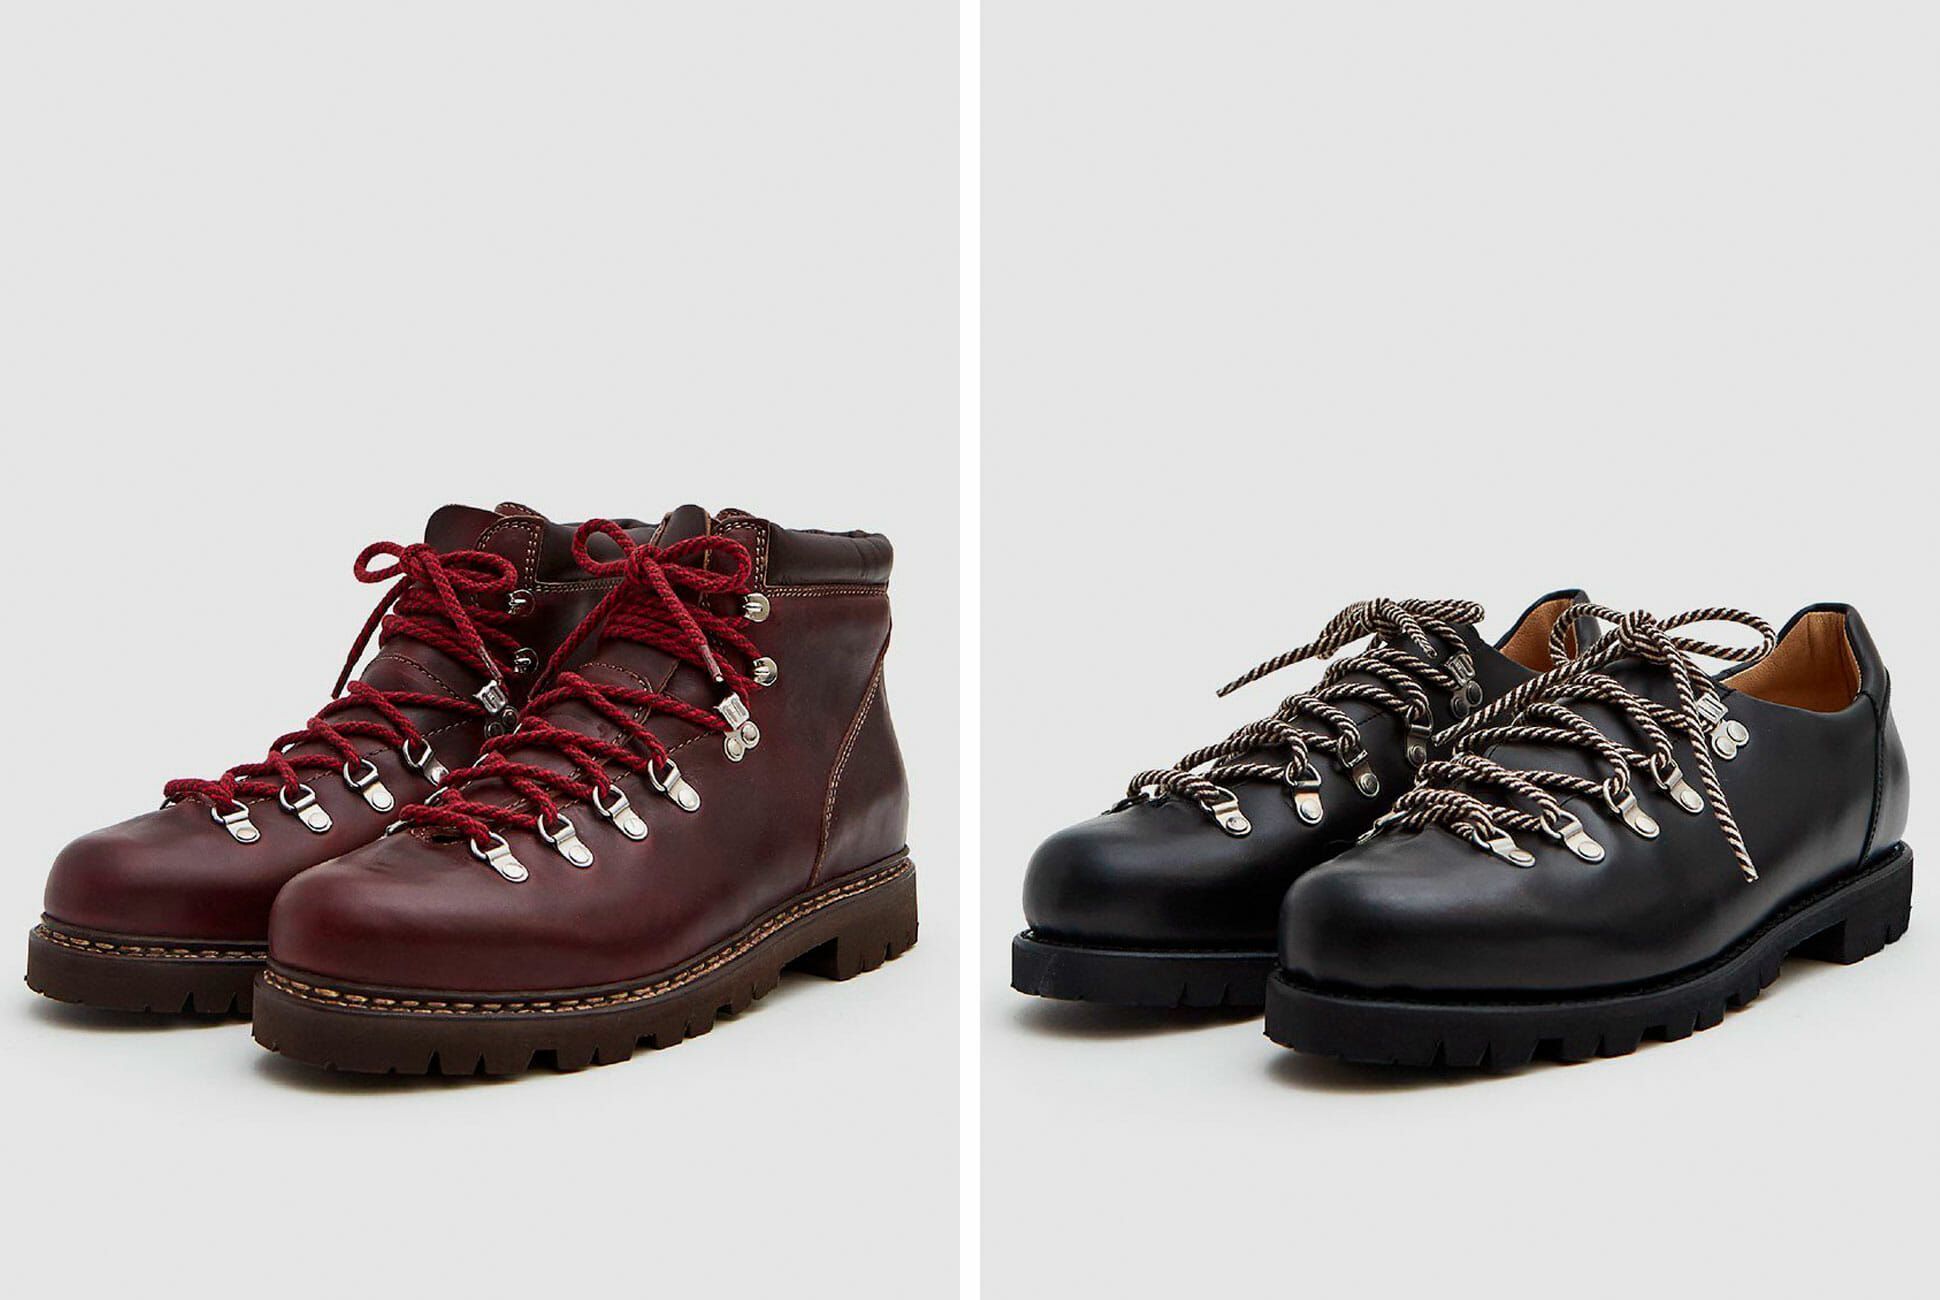 These Vintage-Inspired Boots Are 